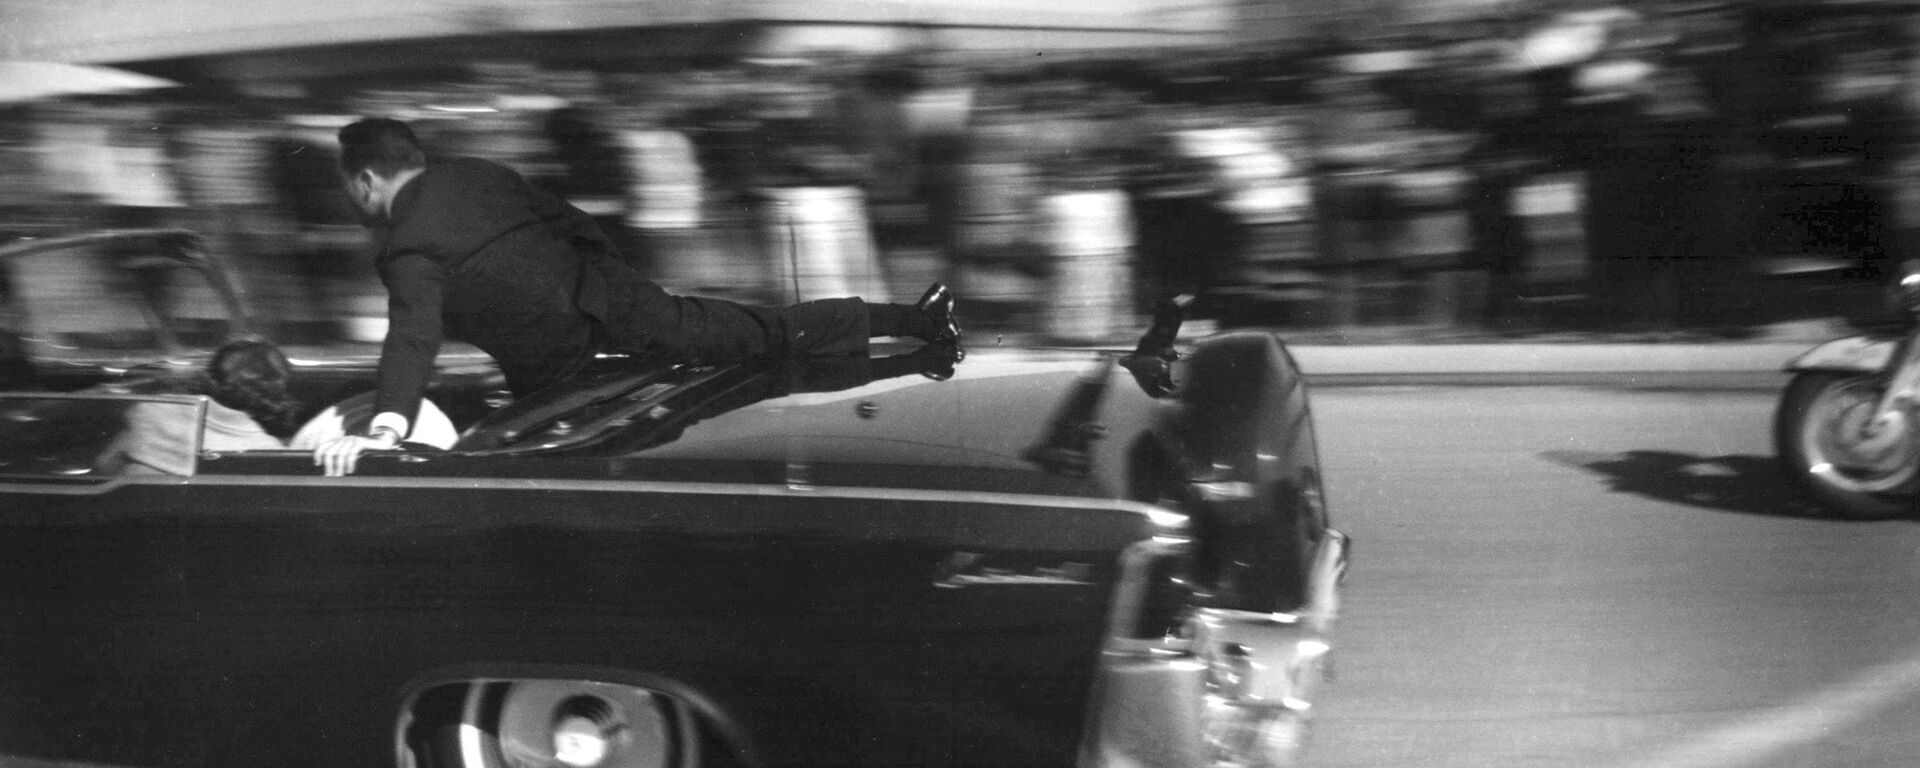 FILE - In this Nov. 22, 1963 file photo, the limousine carrying mortally wounded President John F. Kennedy races toward the hospital seconds after he was shot in Dallas. Secret Service agent Clinton Hill is riding on the back of the car, Nellie Connally, wife of Texas Gov. John Connally, bends over her wounded husband, and first lady Jacqueline Kennedy leans over the president. The National Archives has until Oct. 26, 2017, to disclose the remaining files related to Kennedy's assassination, unless President Donald Trump intervenes.  - Sputnik International, 1920, 15.12.2021